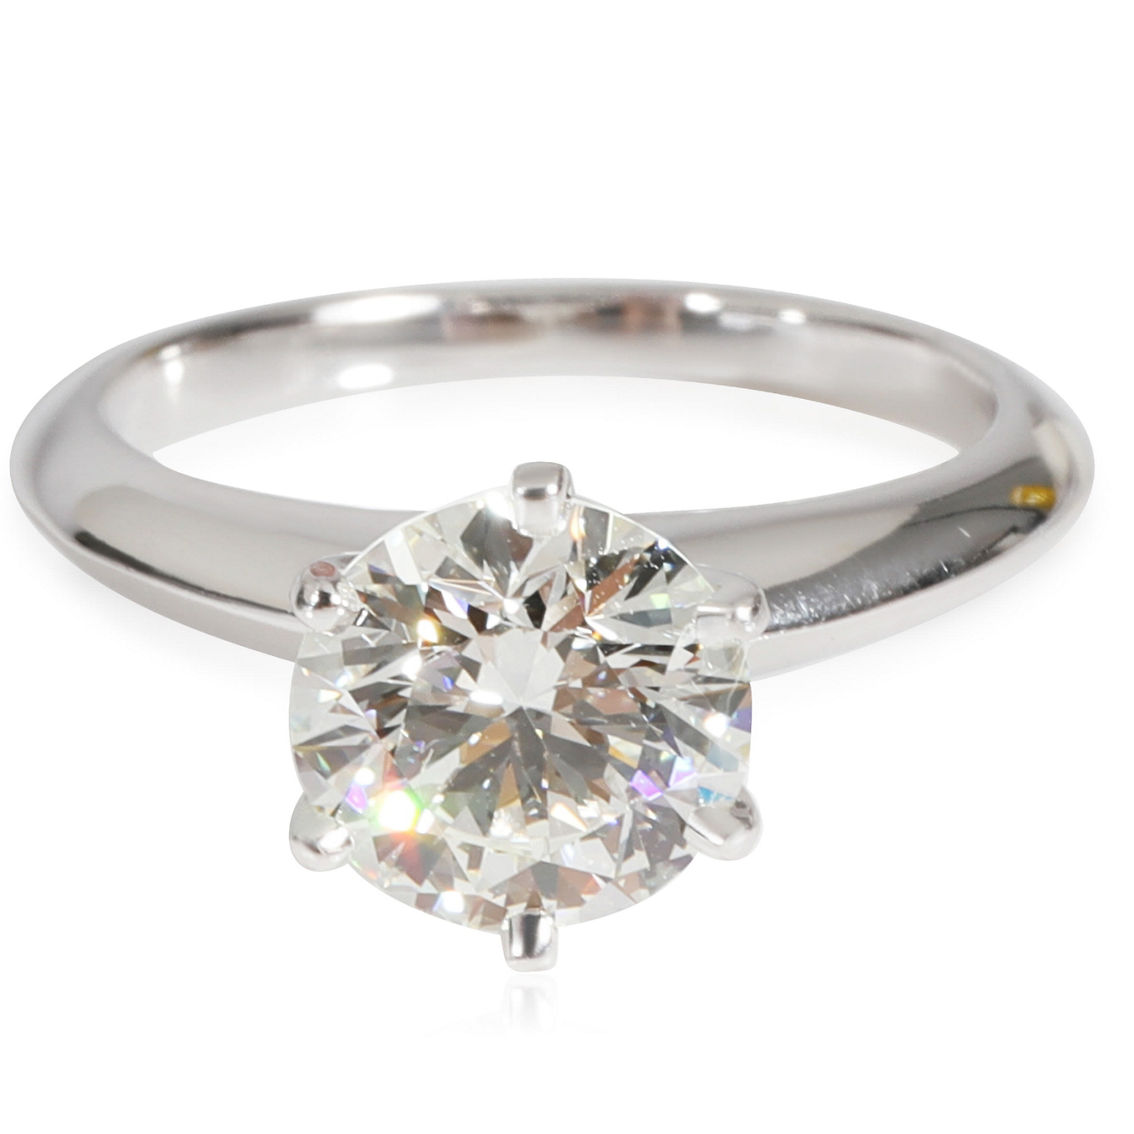 Tiffany & Co. Diamond Solitaire Engagement Ring in Platinum H VS1 1.53 CT Pre-Owned - Image 1 of 3